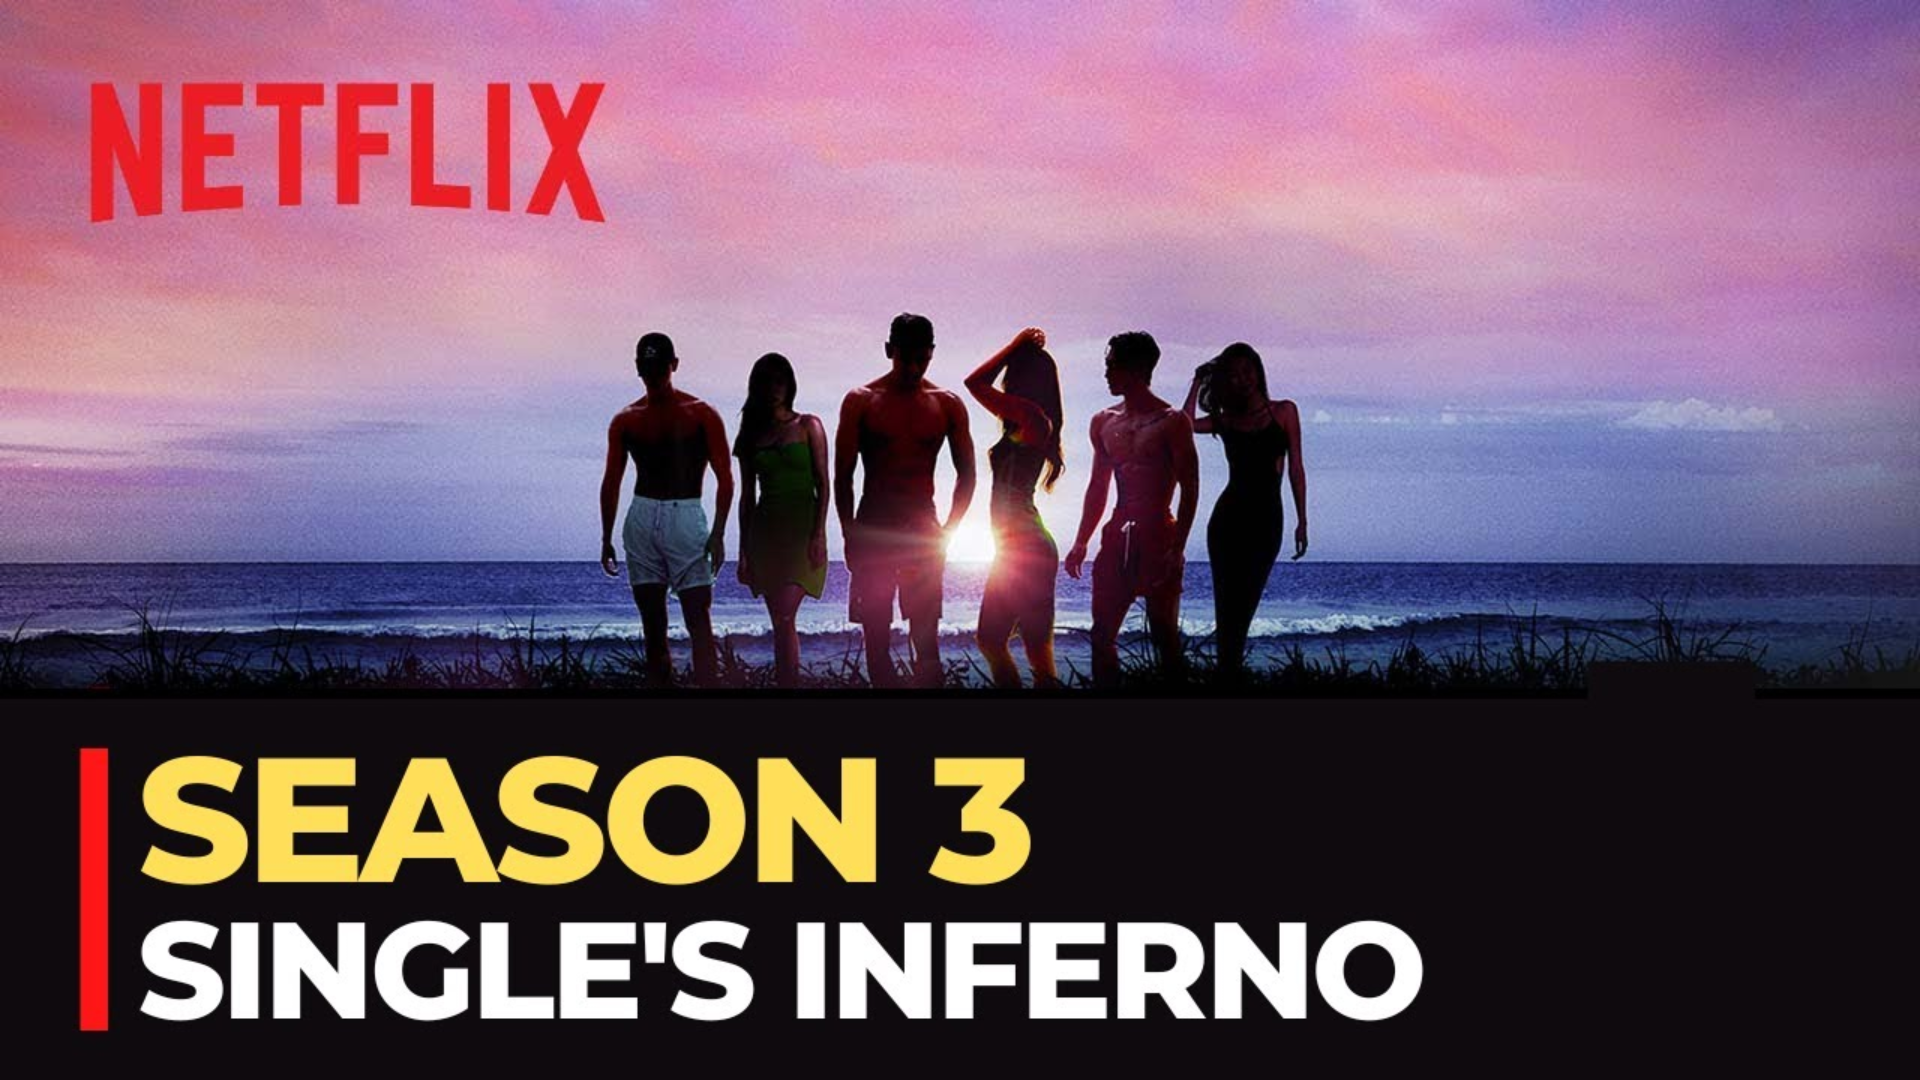 Sizzling Excitement as ‘Singles Inferno’ Season 3 Premieres with a Bang!